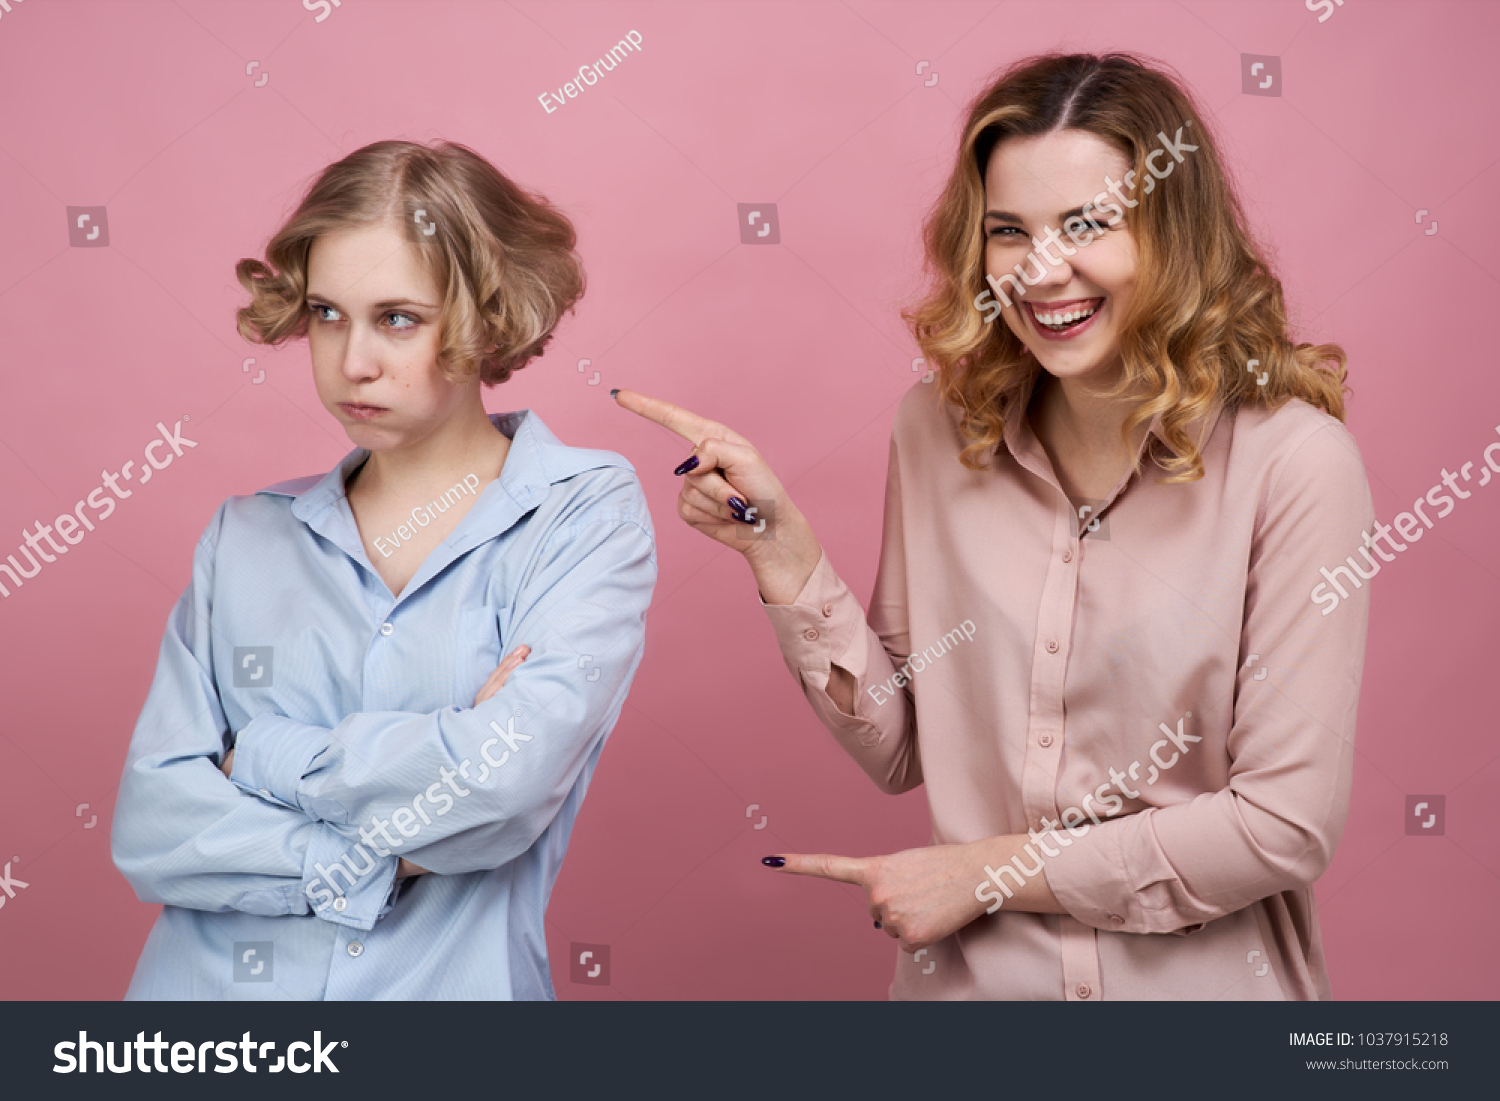 Two young girls pose for a Studio portrait on isolated background. One of them laughs and has fun mocking the failure of the other. The concept of trolling to be bullying and friendships #1037915218